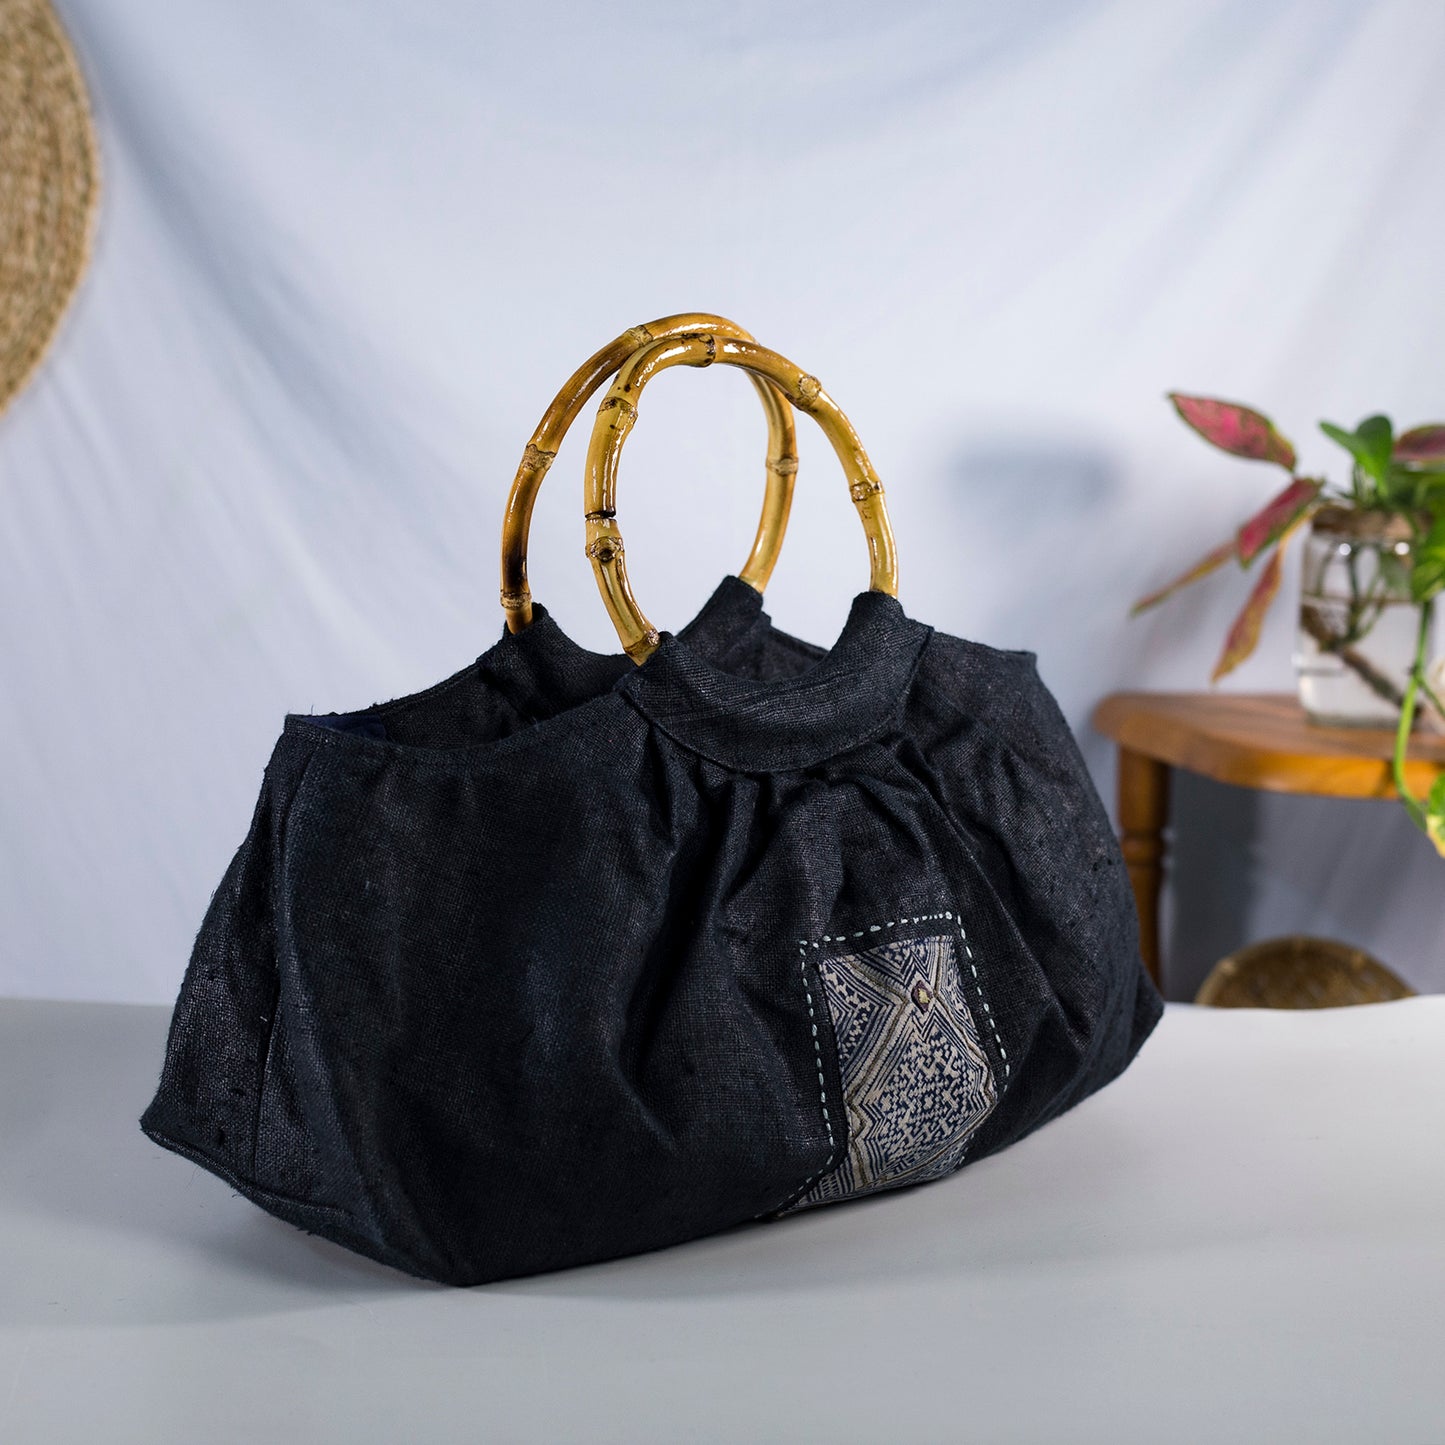 Bamboo handle bag, natural hemp in BLACK with vintage patch